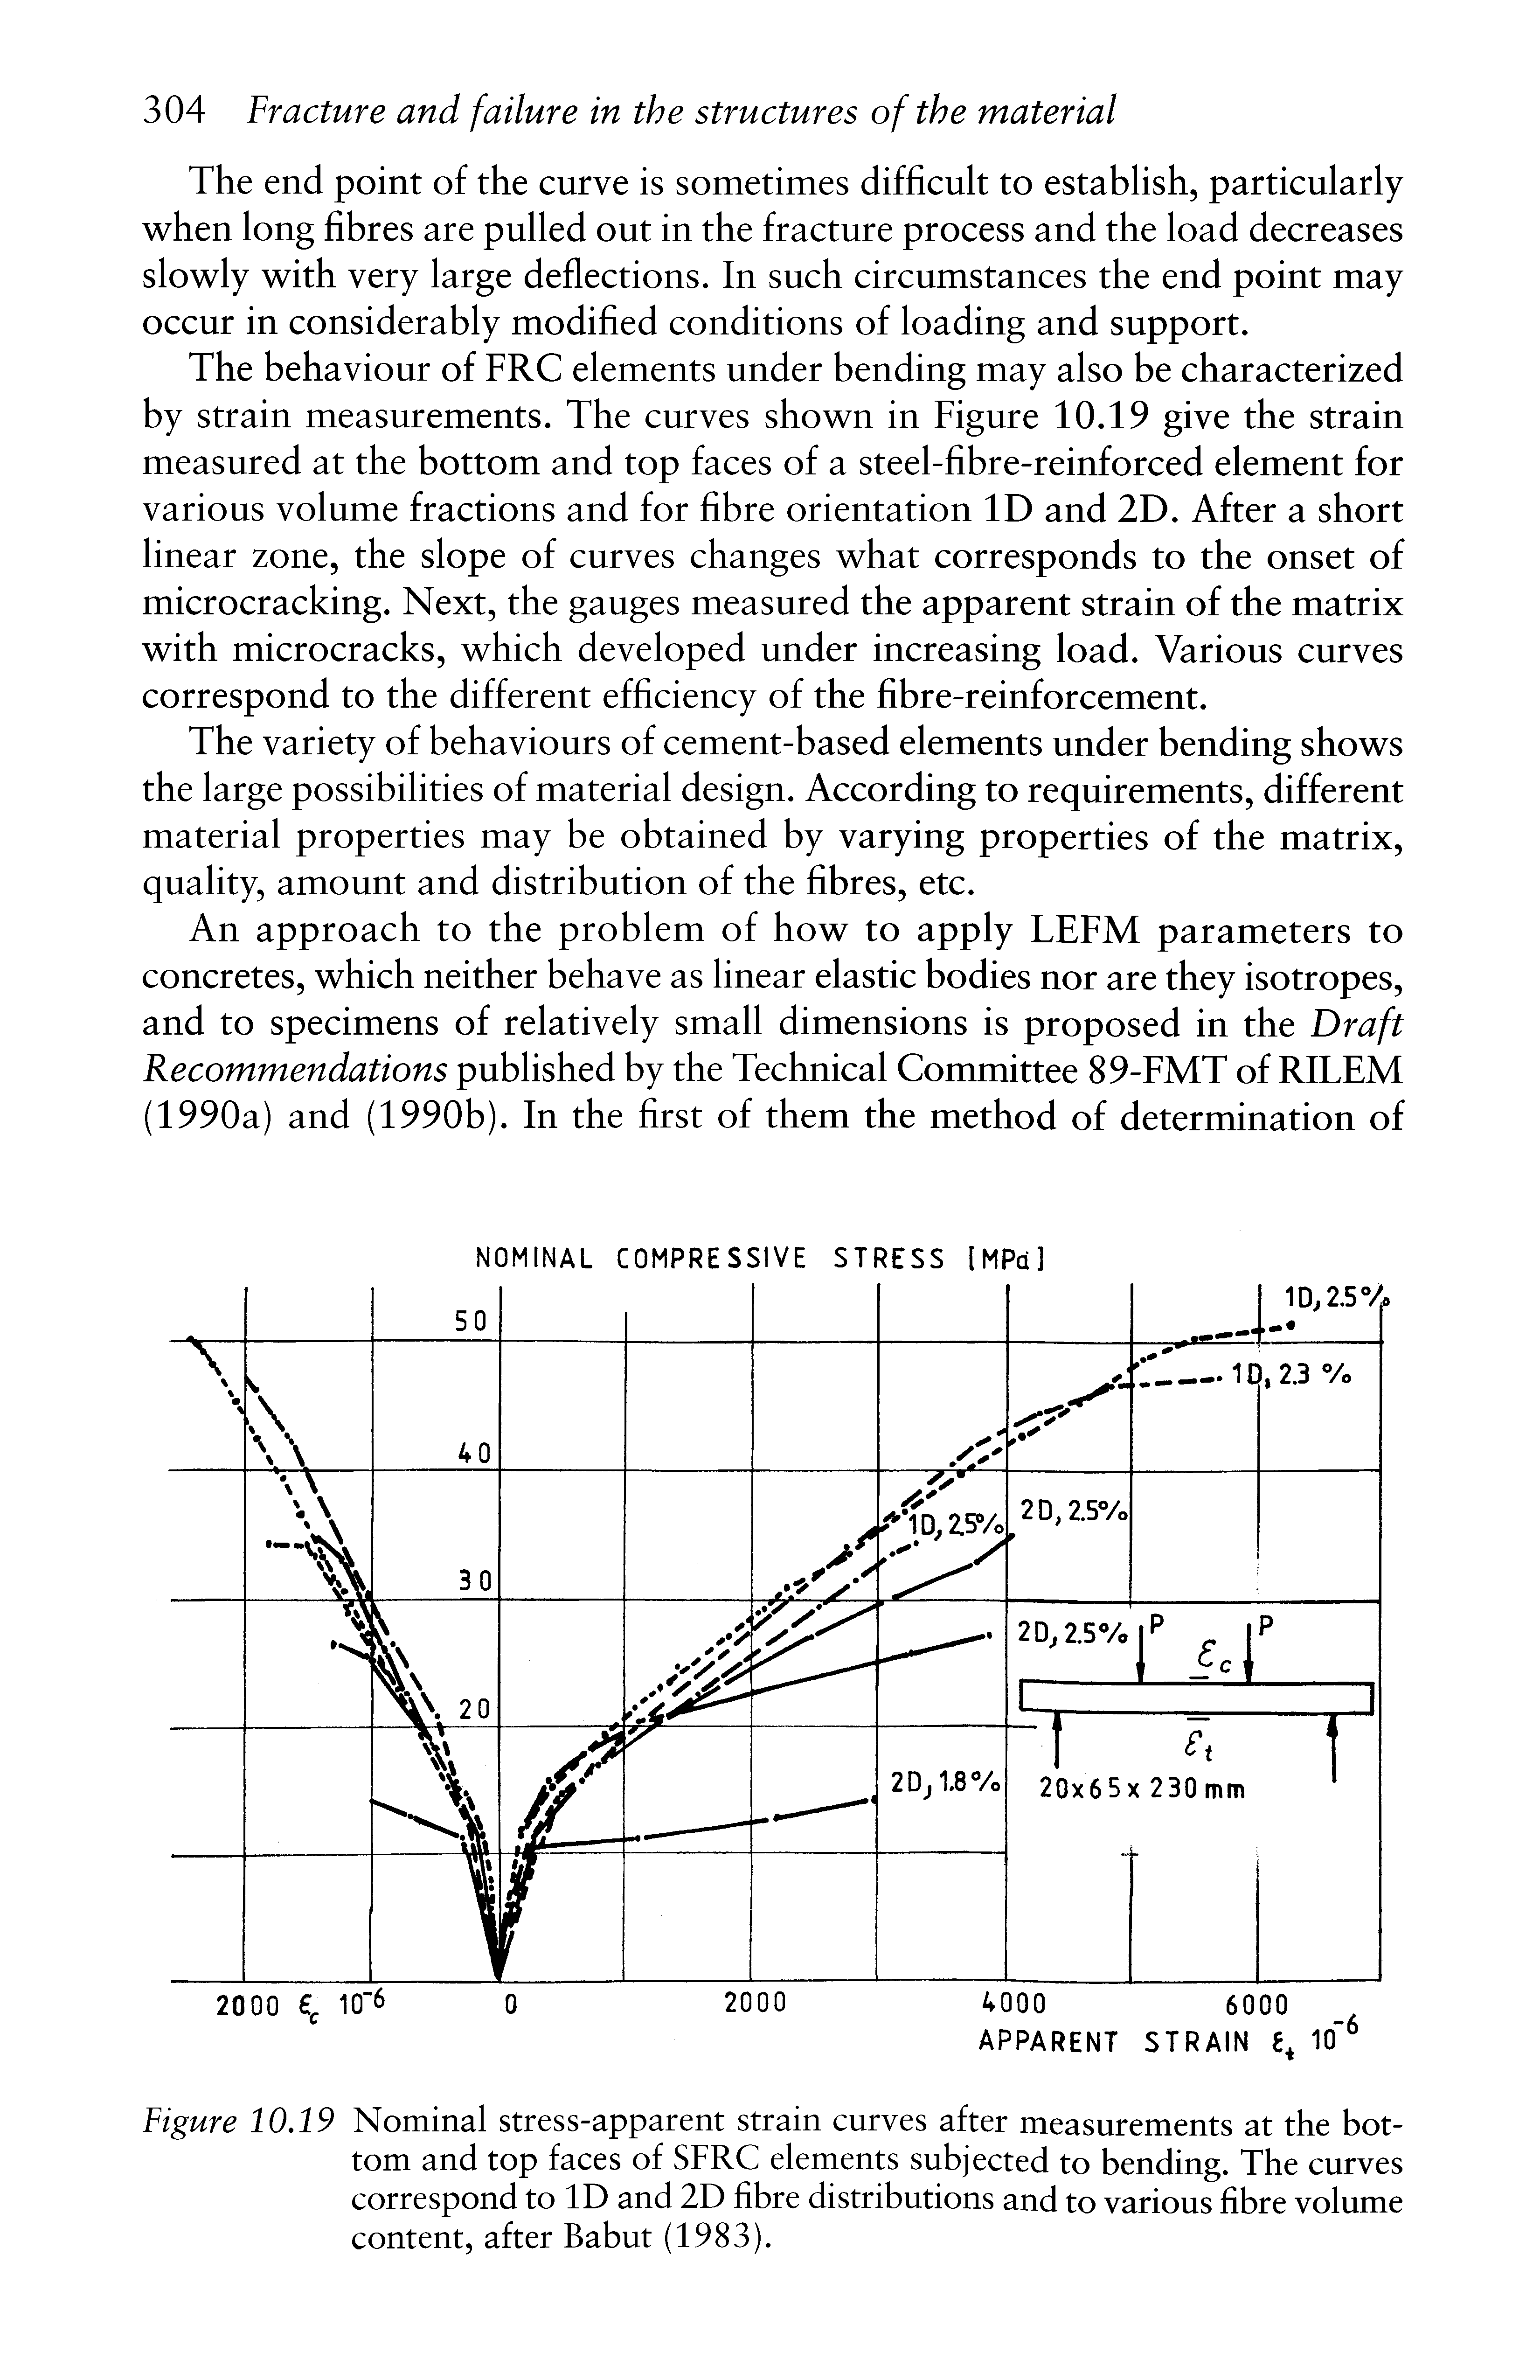 Figure 10.19 Nominal stress-apparent strain curves after measurements at the bottom and top faces of SFRC elements subjected to bending. The curves correspond to ID and 2D fibre distributions and to various fibre volume content, after Babut (1983).